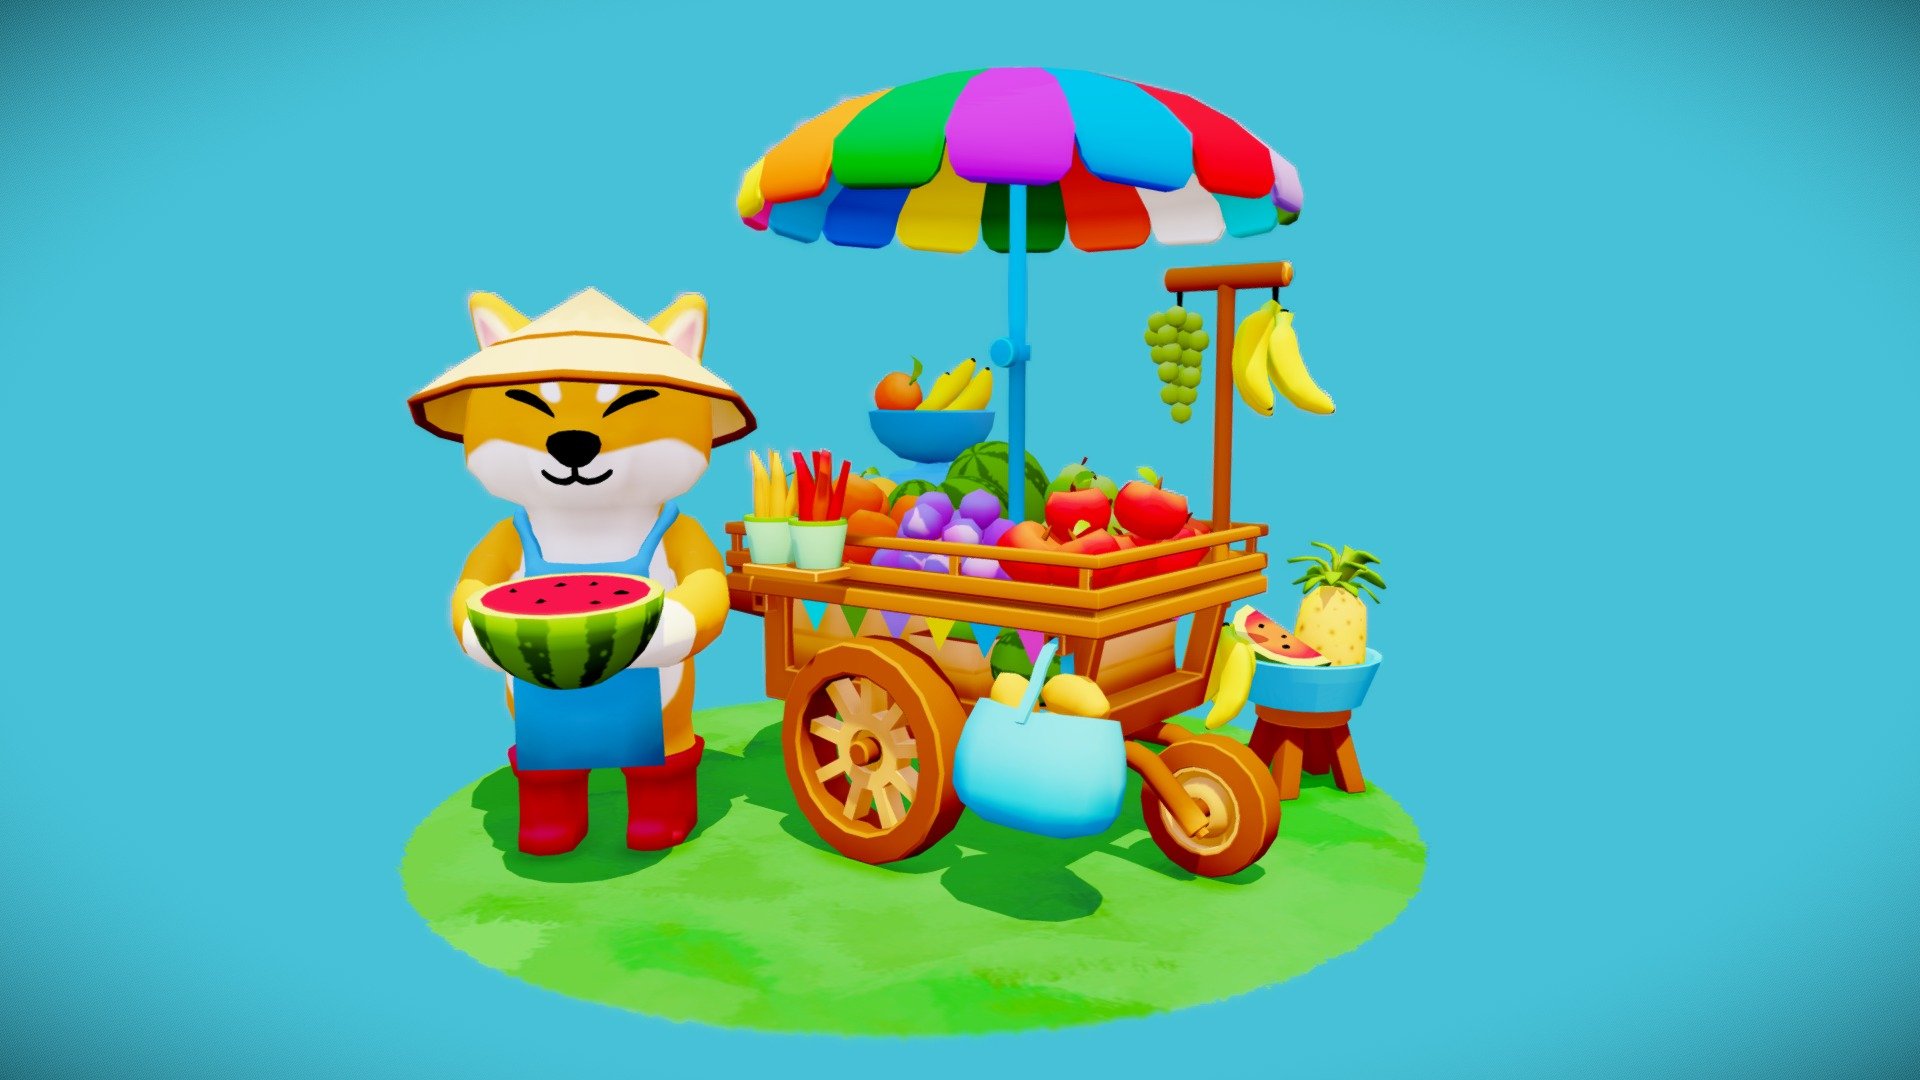 Hello everyone,

This is my submission for the street food challenge hosted by @rosiejarvis  I had a great time making it. My theme is about a fruit vendor cart. I wanted to keep it colorful and simple. This was created with Blender. It was a nice fun challenge and to use sketchfab for presentation. Although there was room for improvements maybe at some point in future after the contest I might add new updates to this scene. Good luck to everyone participating. I hope you like it. Thank you for viewing :) - Fruit Cart - Street Food Challenge - 3D model by Farrukh 3d model